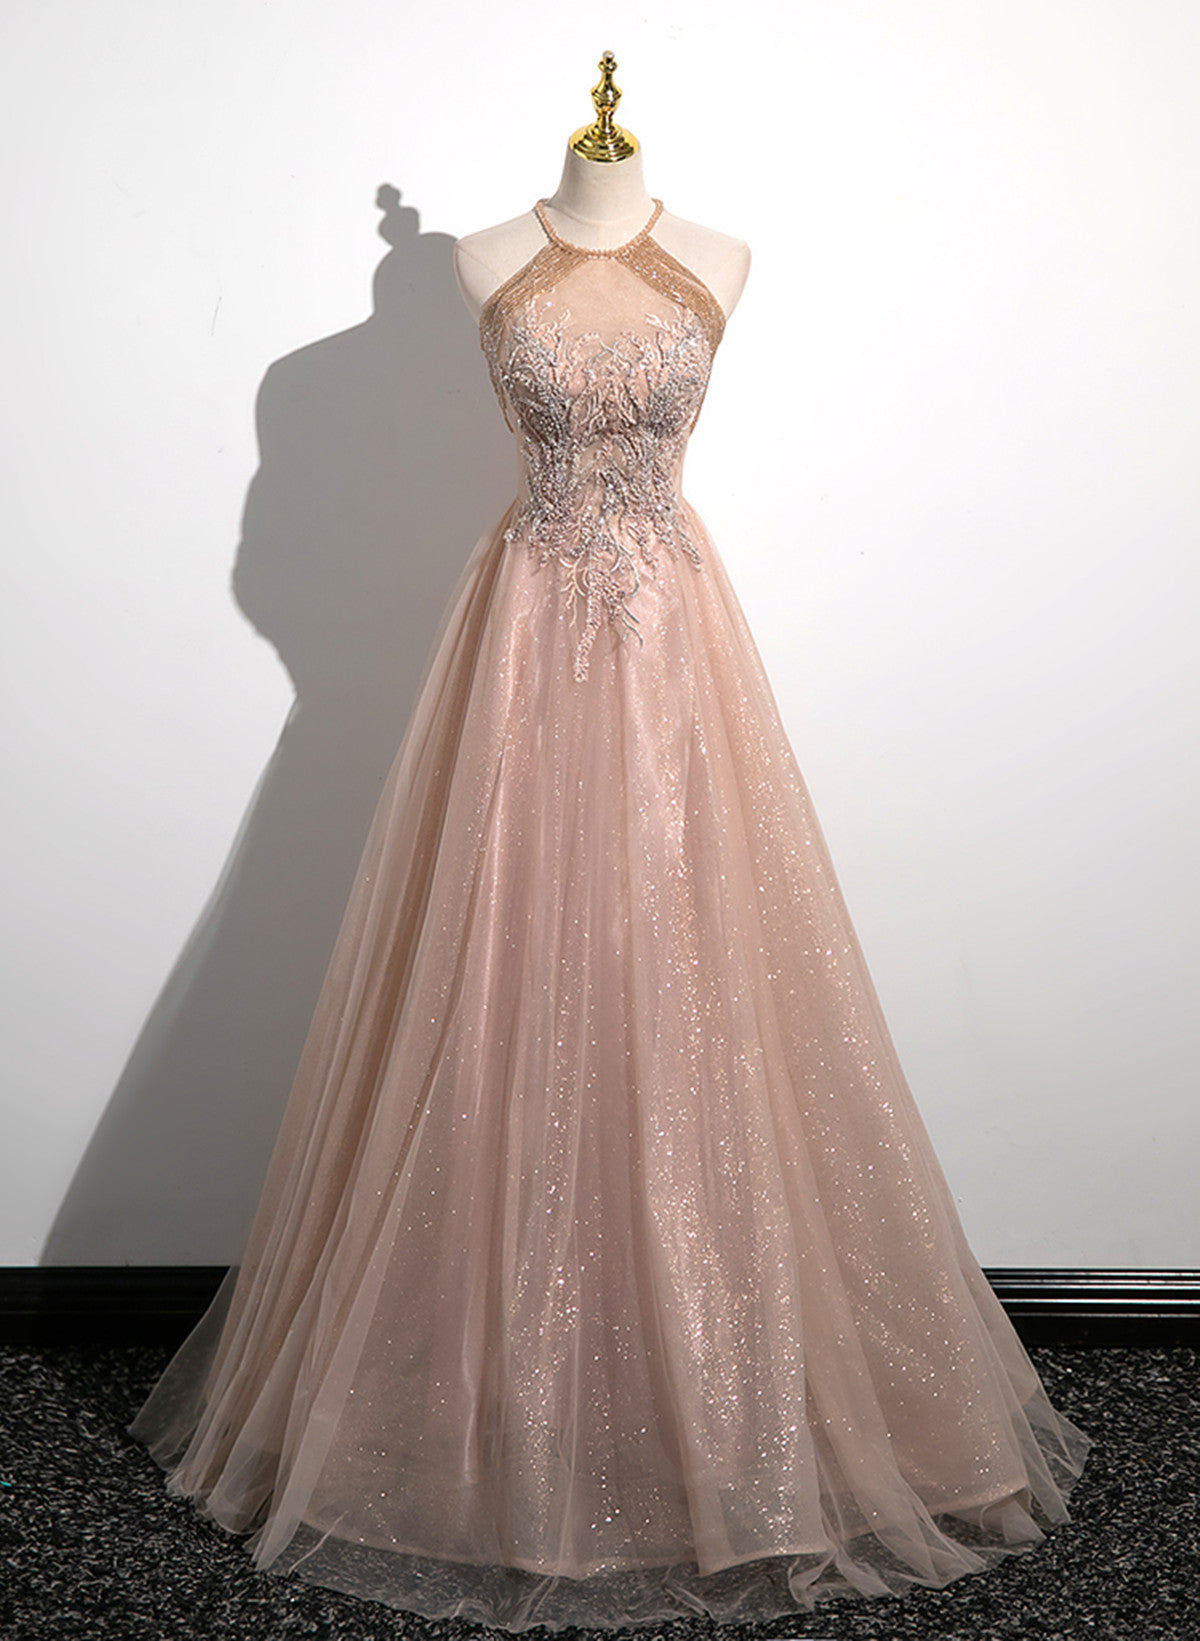 Bridesmaid Dress Elegant, Lovely Pearl Pink Halter Tulle with Lace Applique Party Dress, A-line Tulle Long Prom Dress